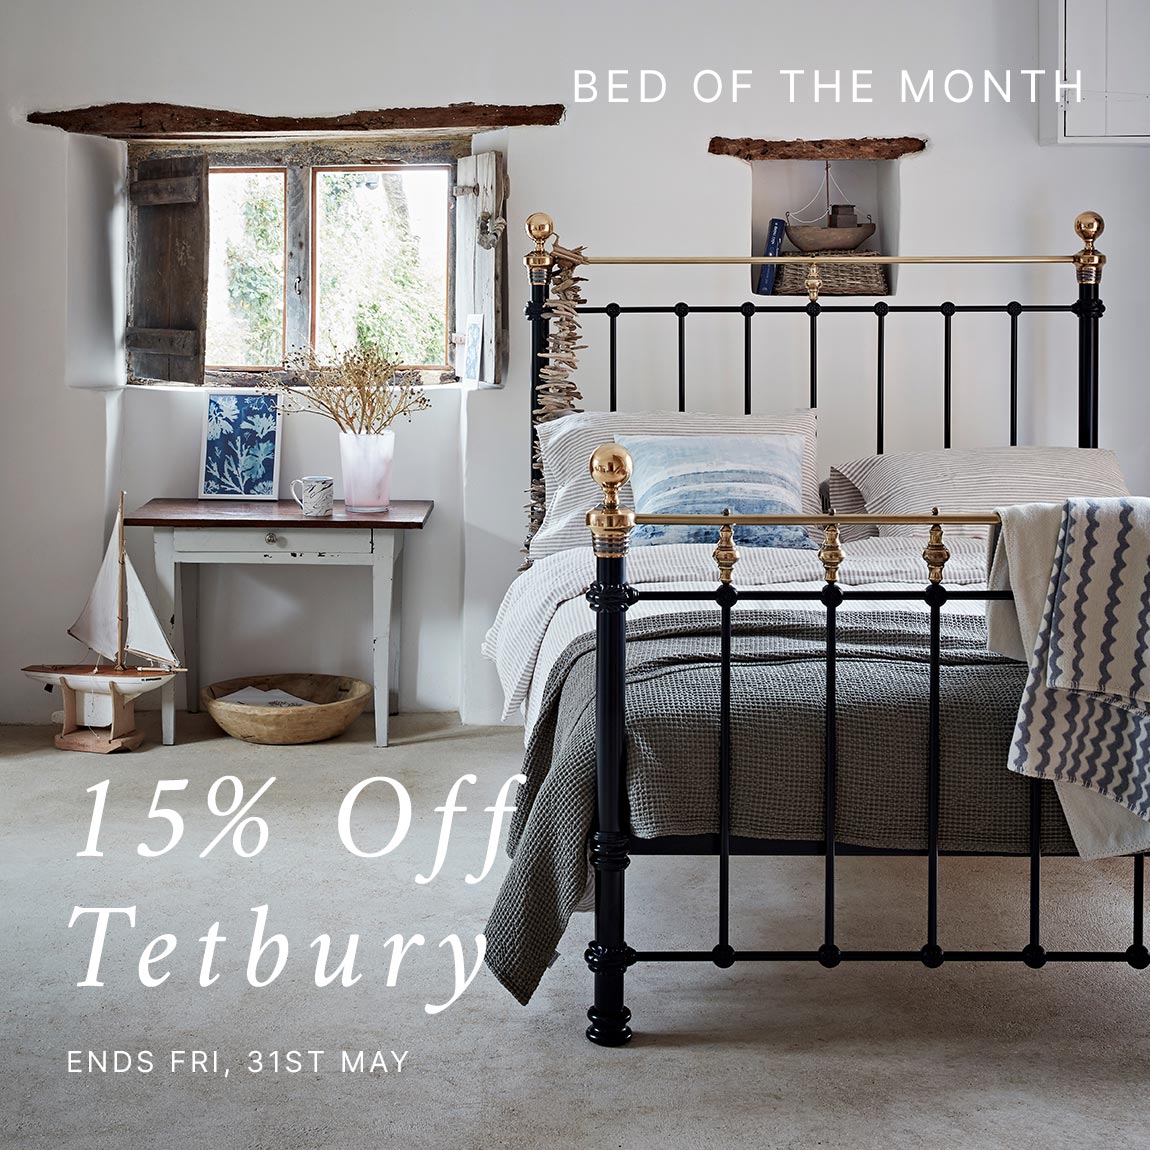 Bed Of The Month Special | Tetbury Bed Design | 15% Off